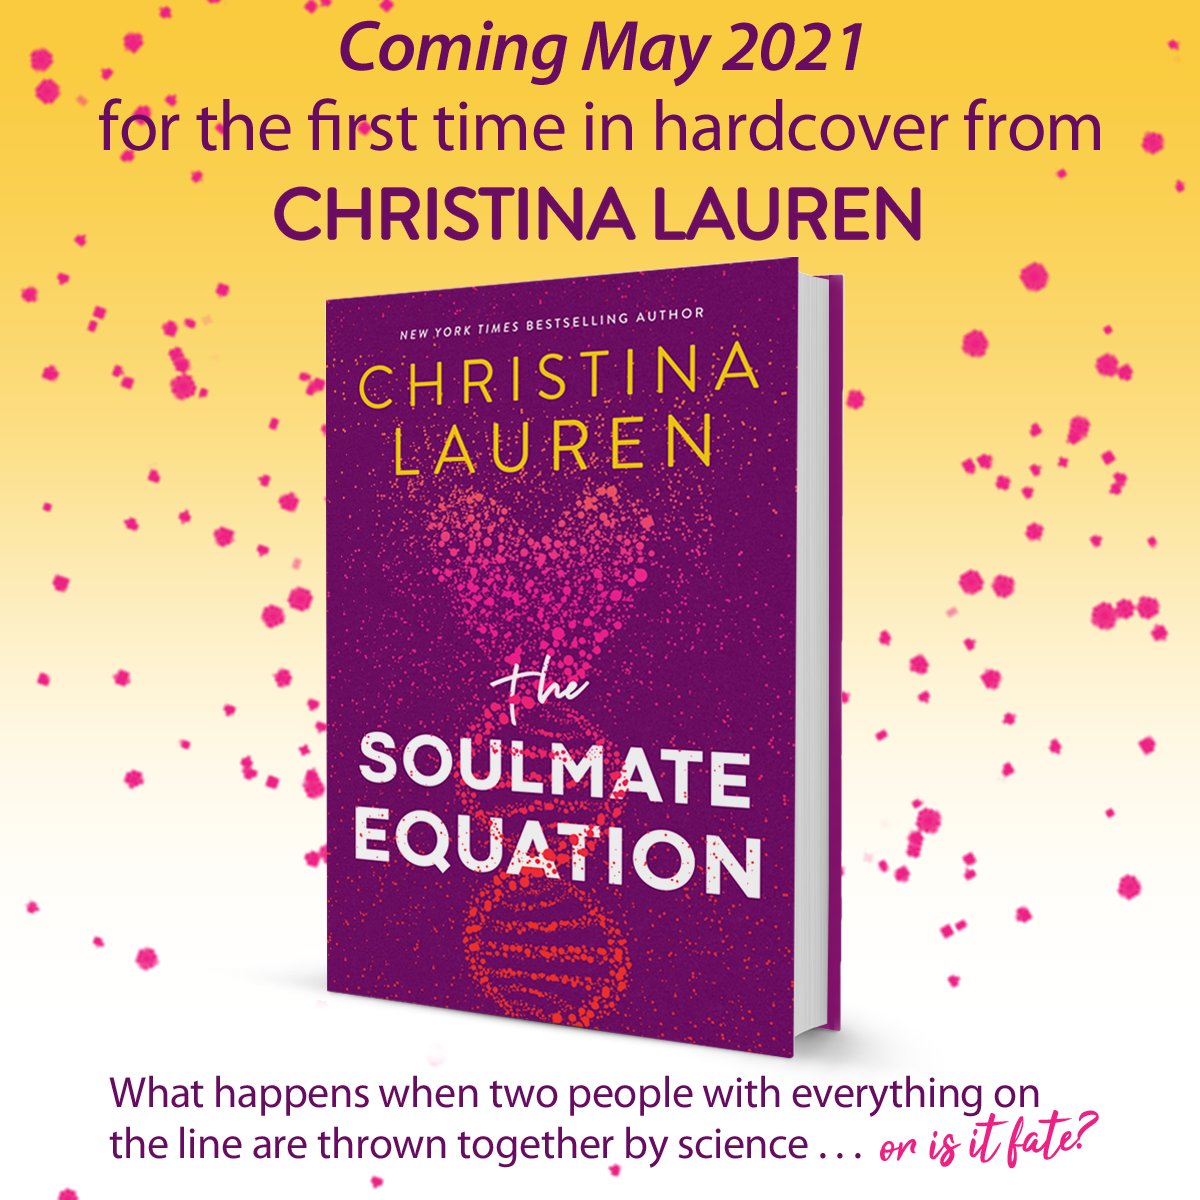 OUR NEXT BOOK! THE SOULMATE EQUATION is out May 18th and we are !!!! Just look at this cover 🤩 Check out @Goodreads for the summary and to add to your To Read list! goodreads.com/book/show/5569…